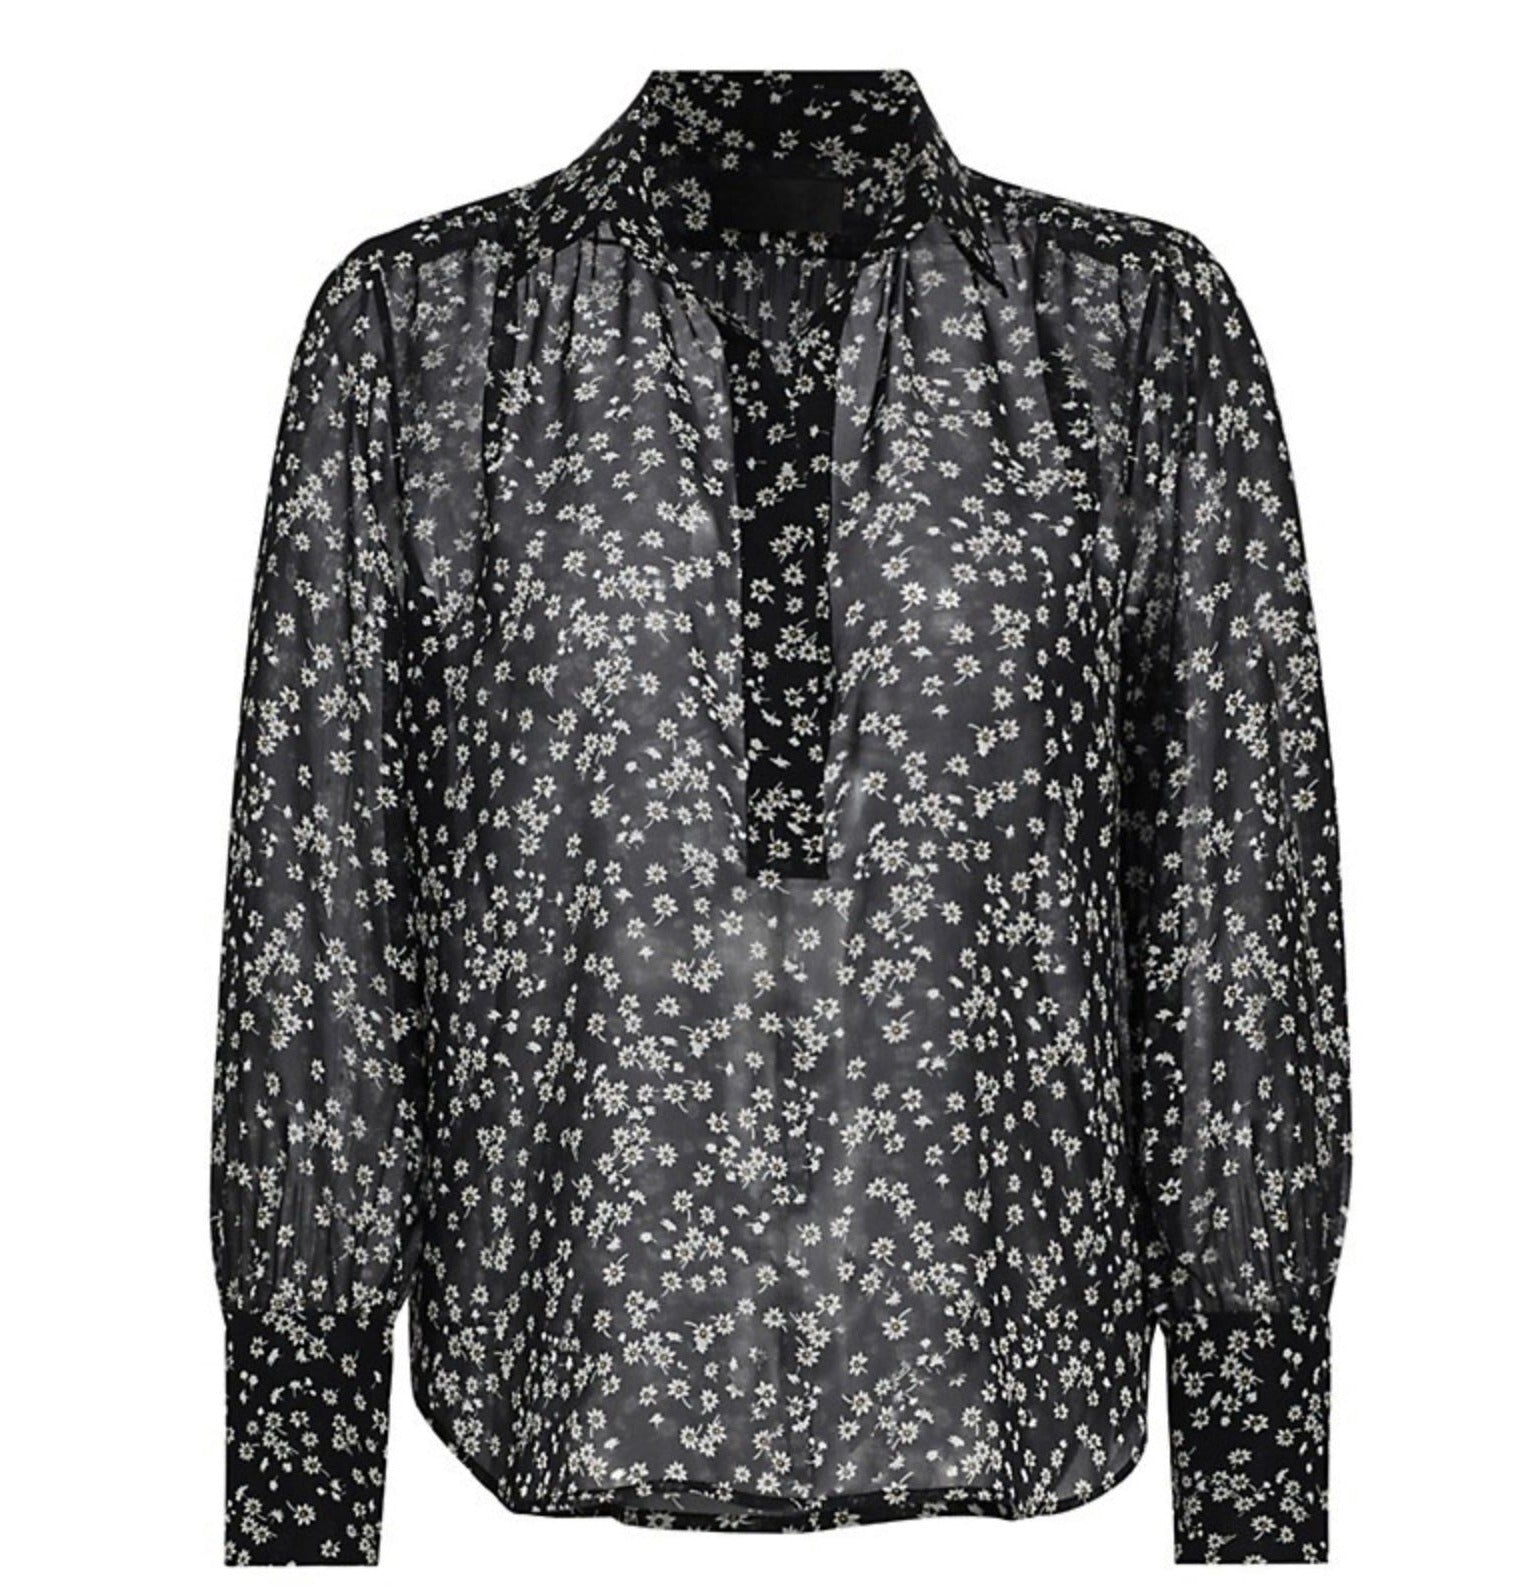 Carina Floral Long Sleeve Top in Black + White